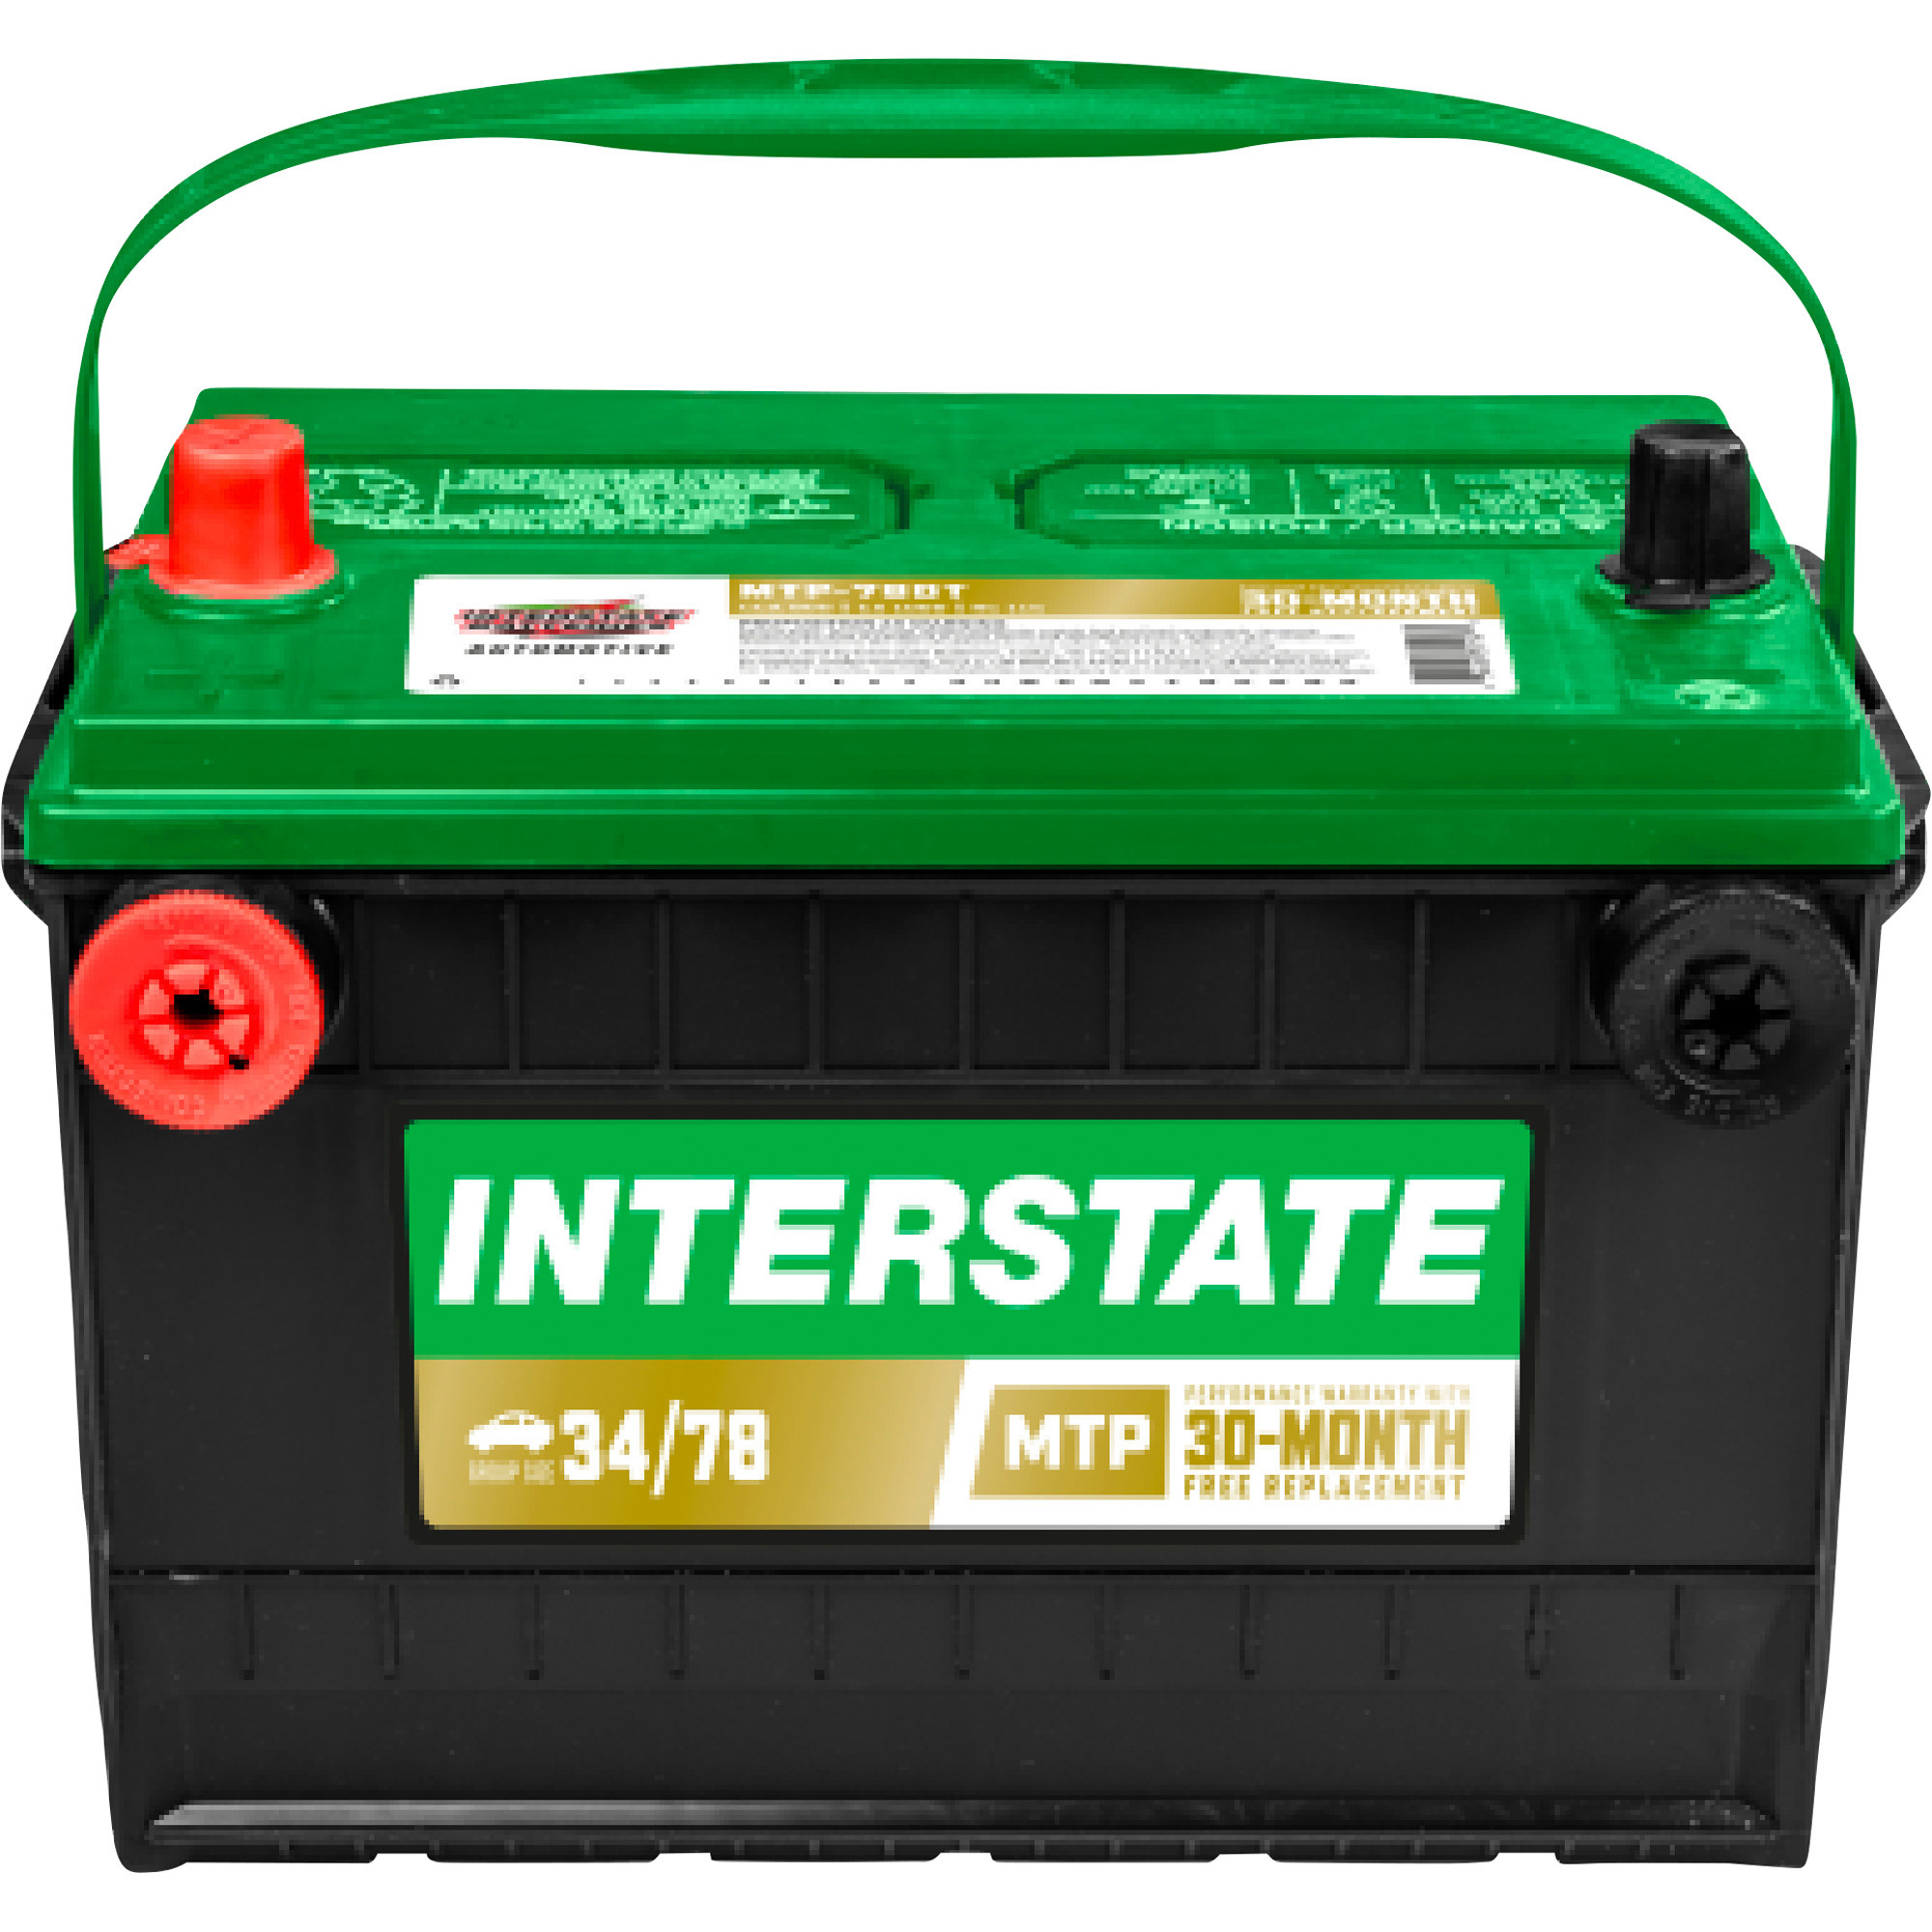 Interstate Heavy-Duty Dual-Terminal Battery, Group Size 78, 12 Volt, Model MTP-78DT